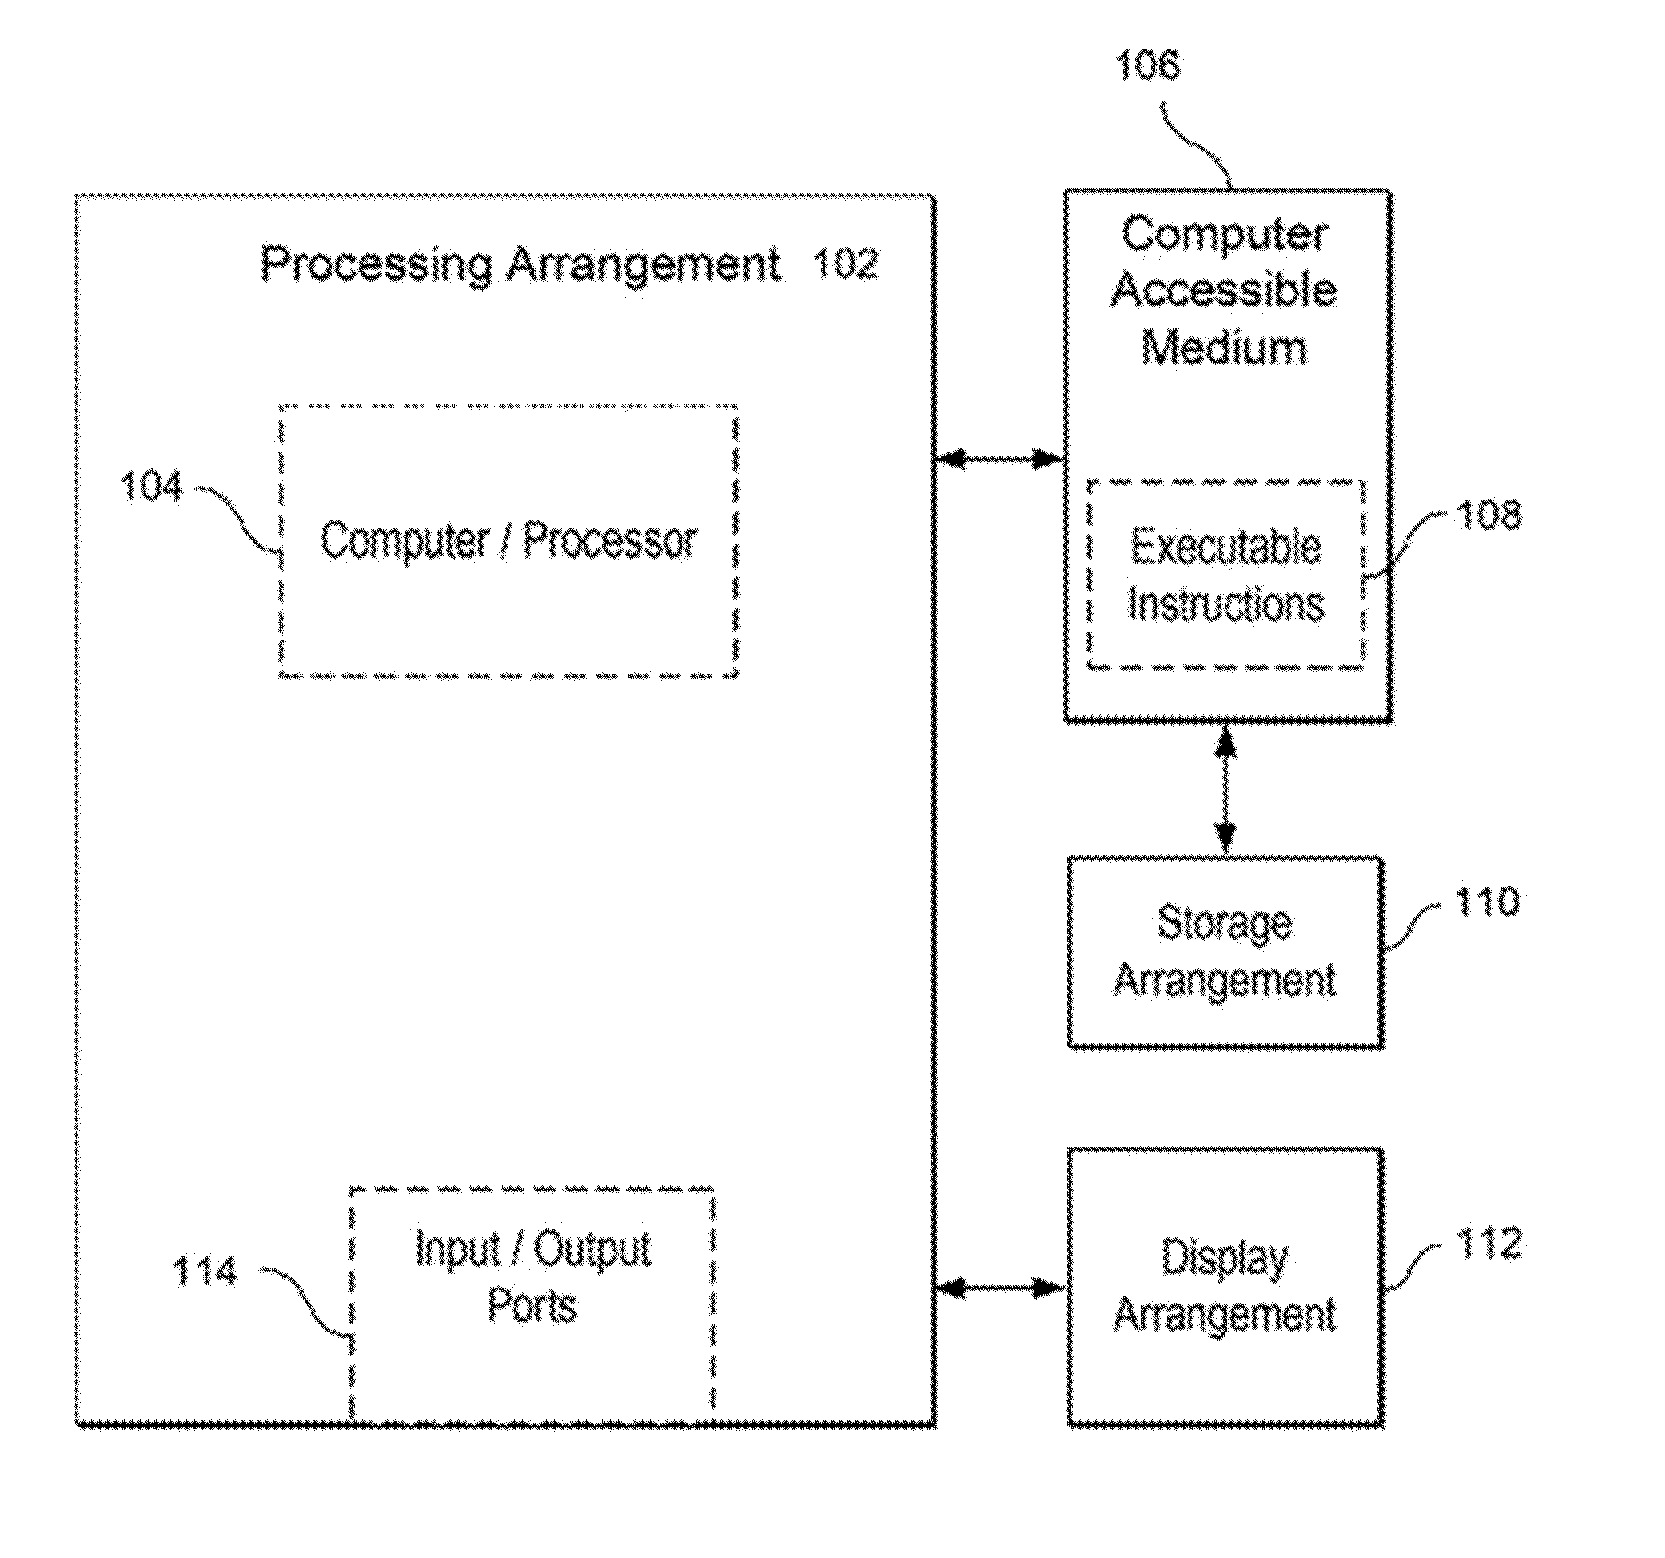 Apparatus, method and computer-accessible medium for transform analysis of biomedical data